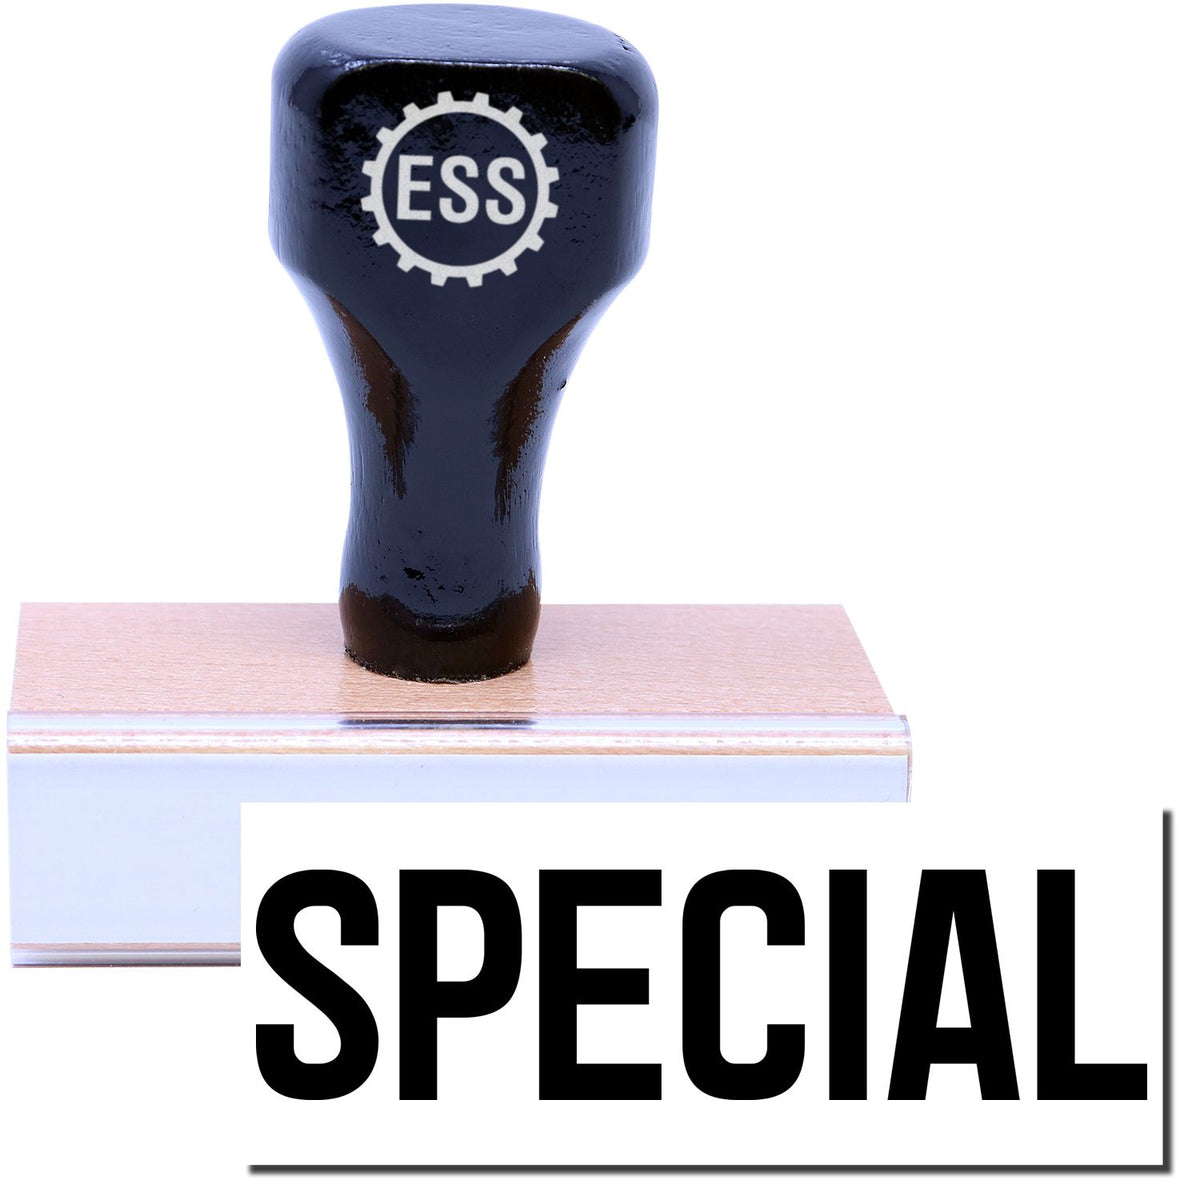 A stock office rubber stamp with a stamped image showing how the text &quot;SPECIAL&quot; in a large font is displayed after stamping.